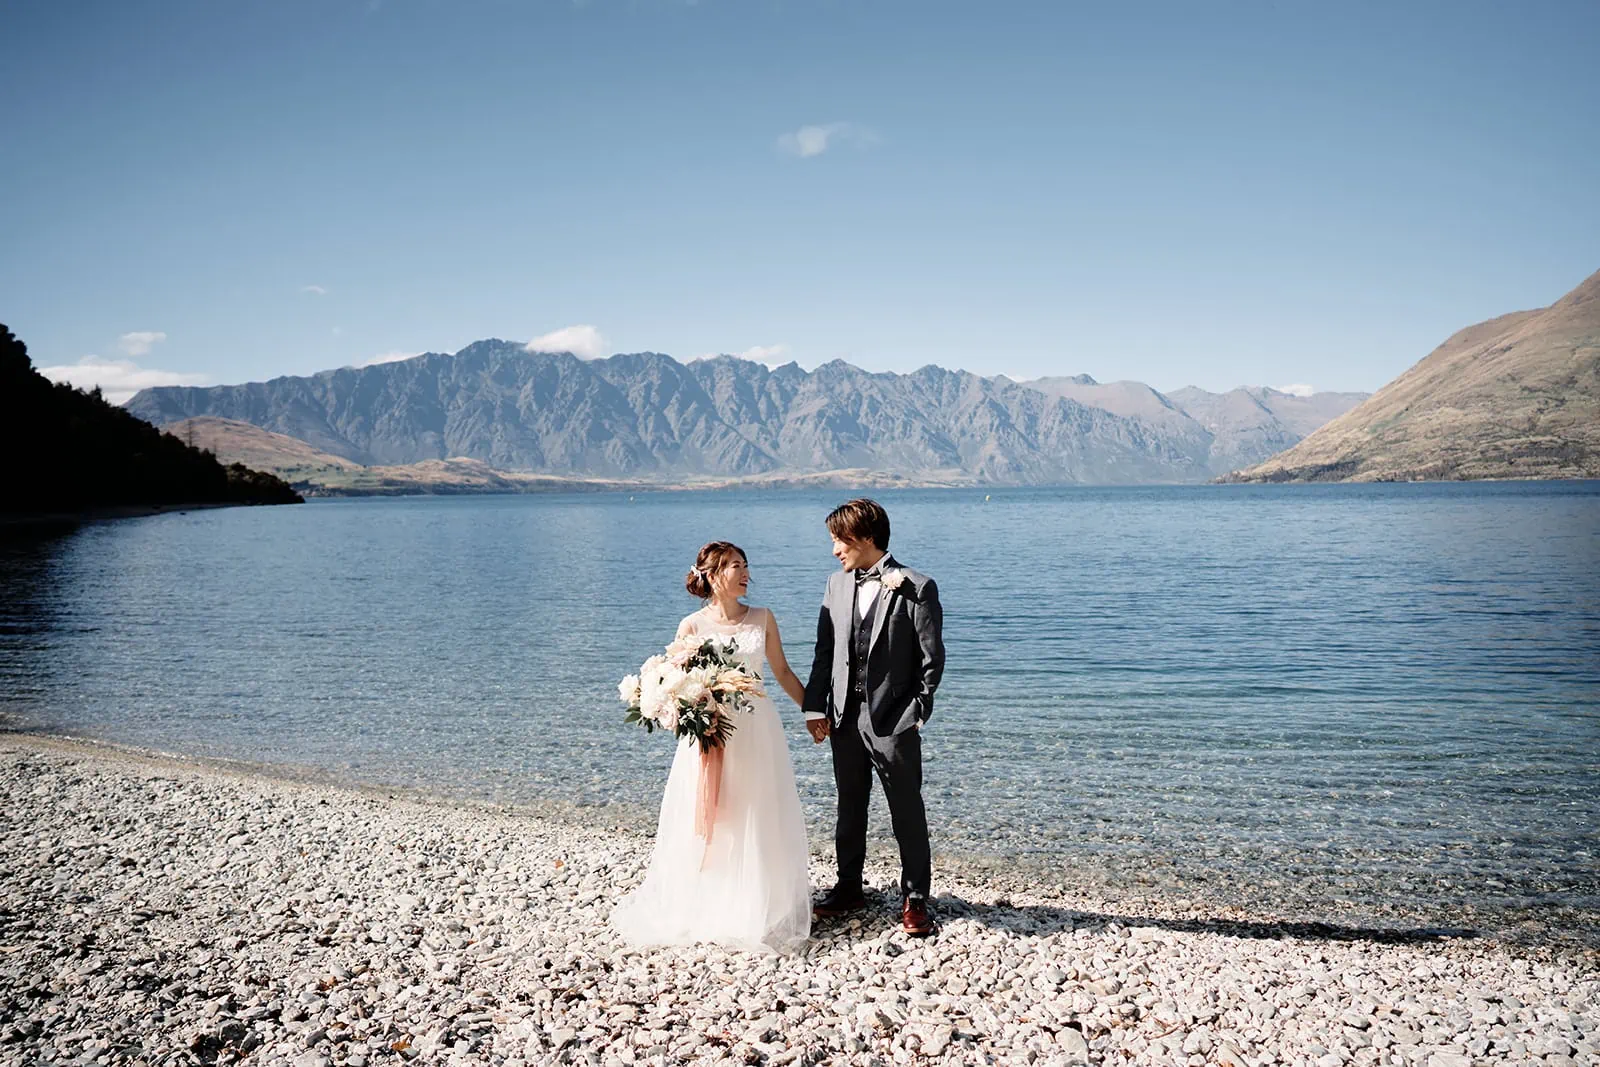 Queenstown New Zealand Elopement Wedding Photographer - A bride and groom standing on the shore of Lake Wanaka, chosen as their Queenstown wedding venue.